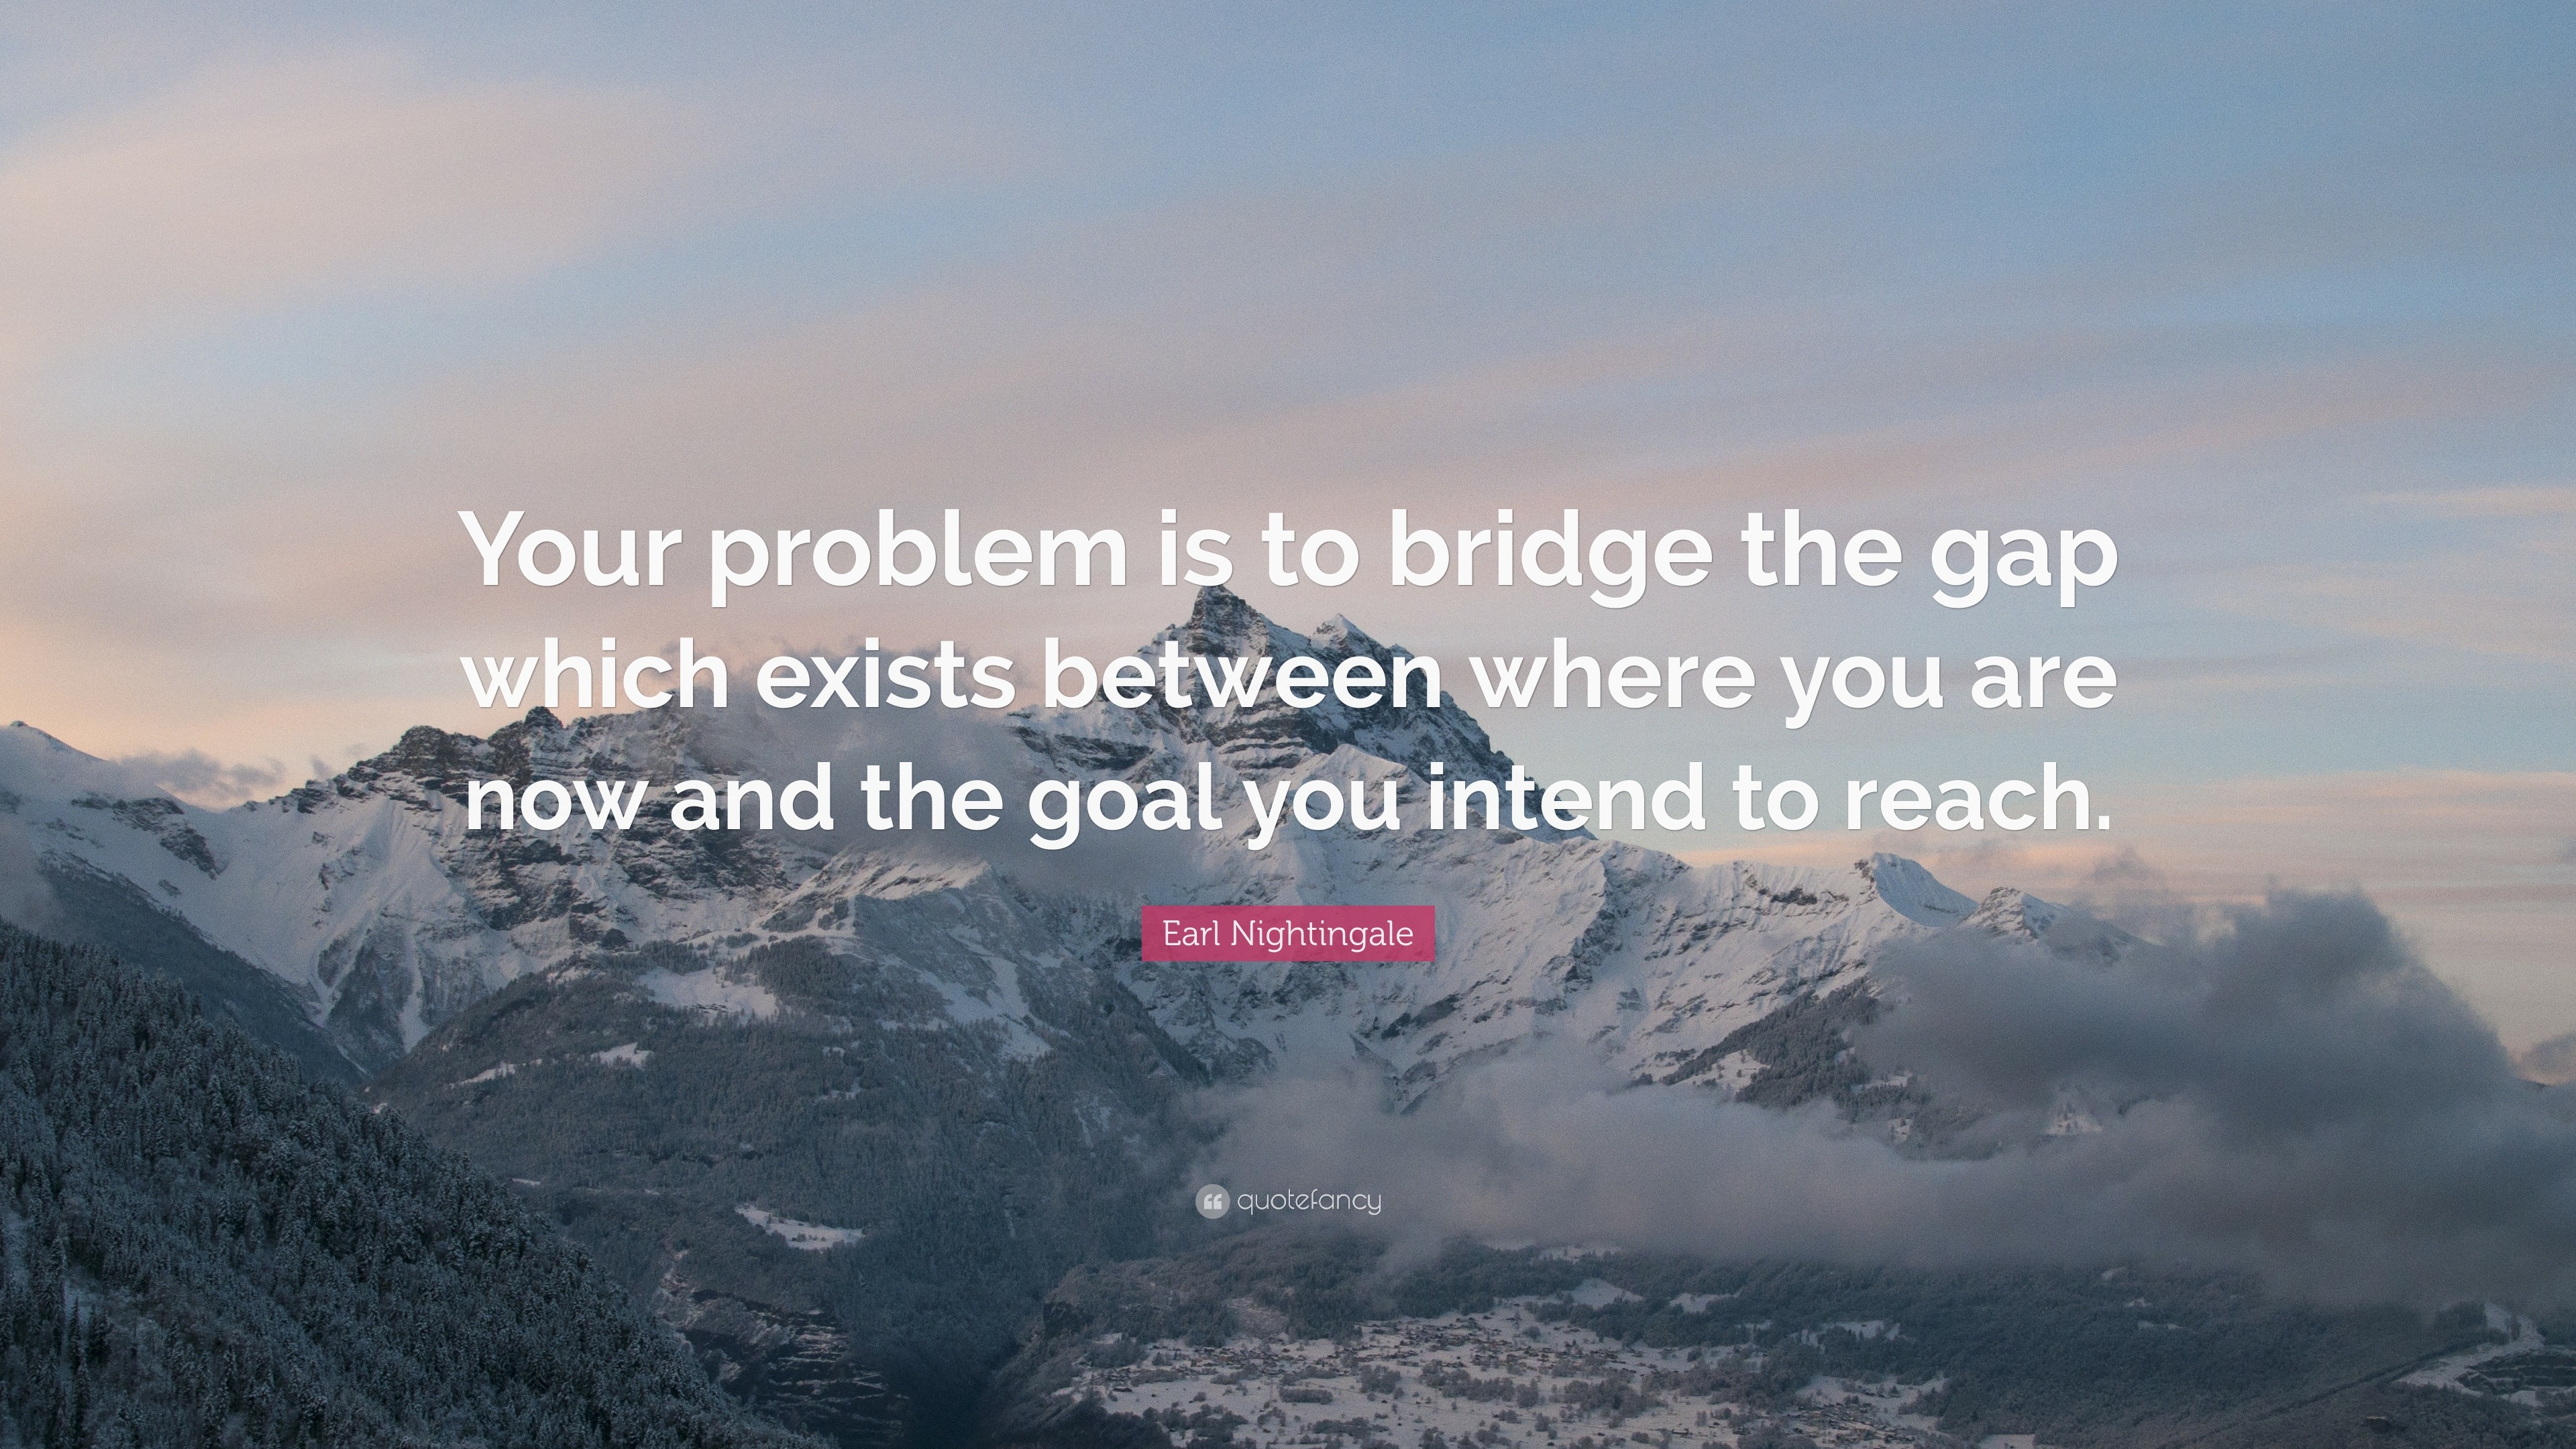 Next Level – Bridge the gap between your vision and now